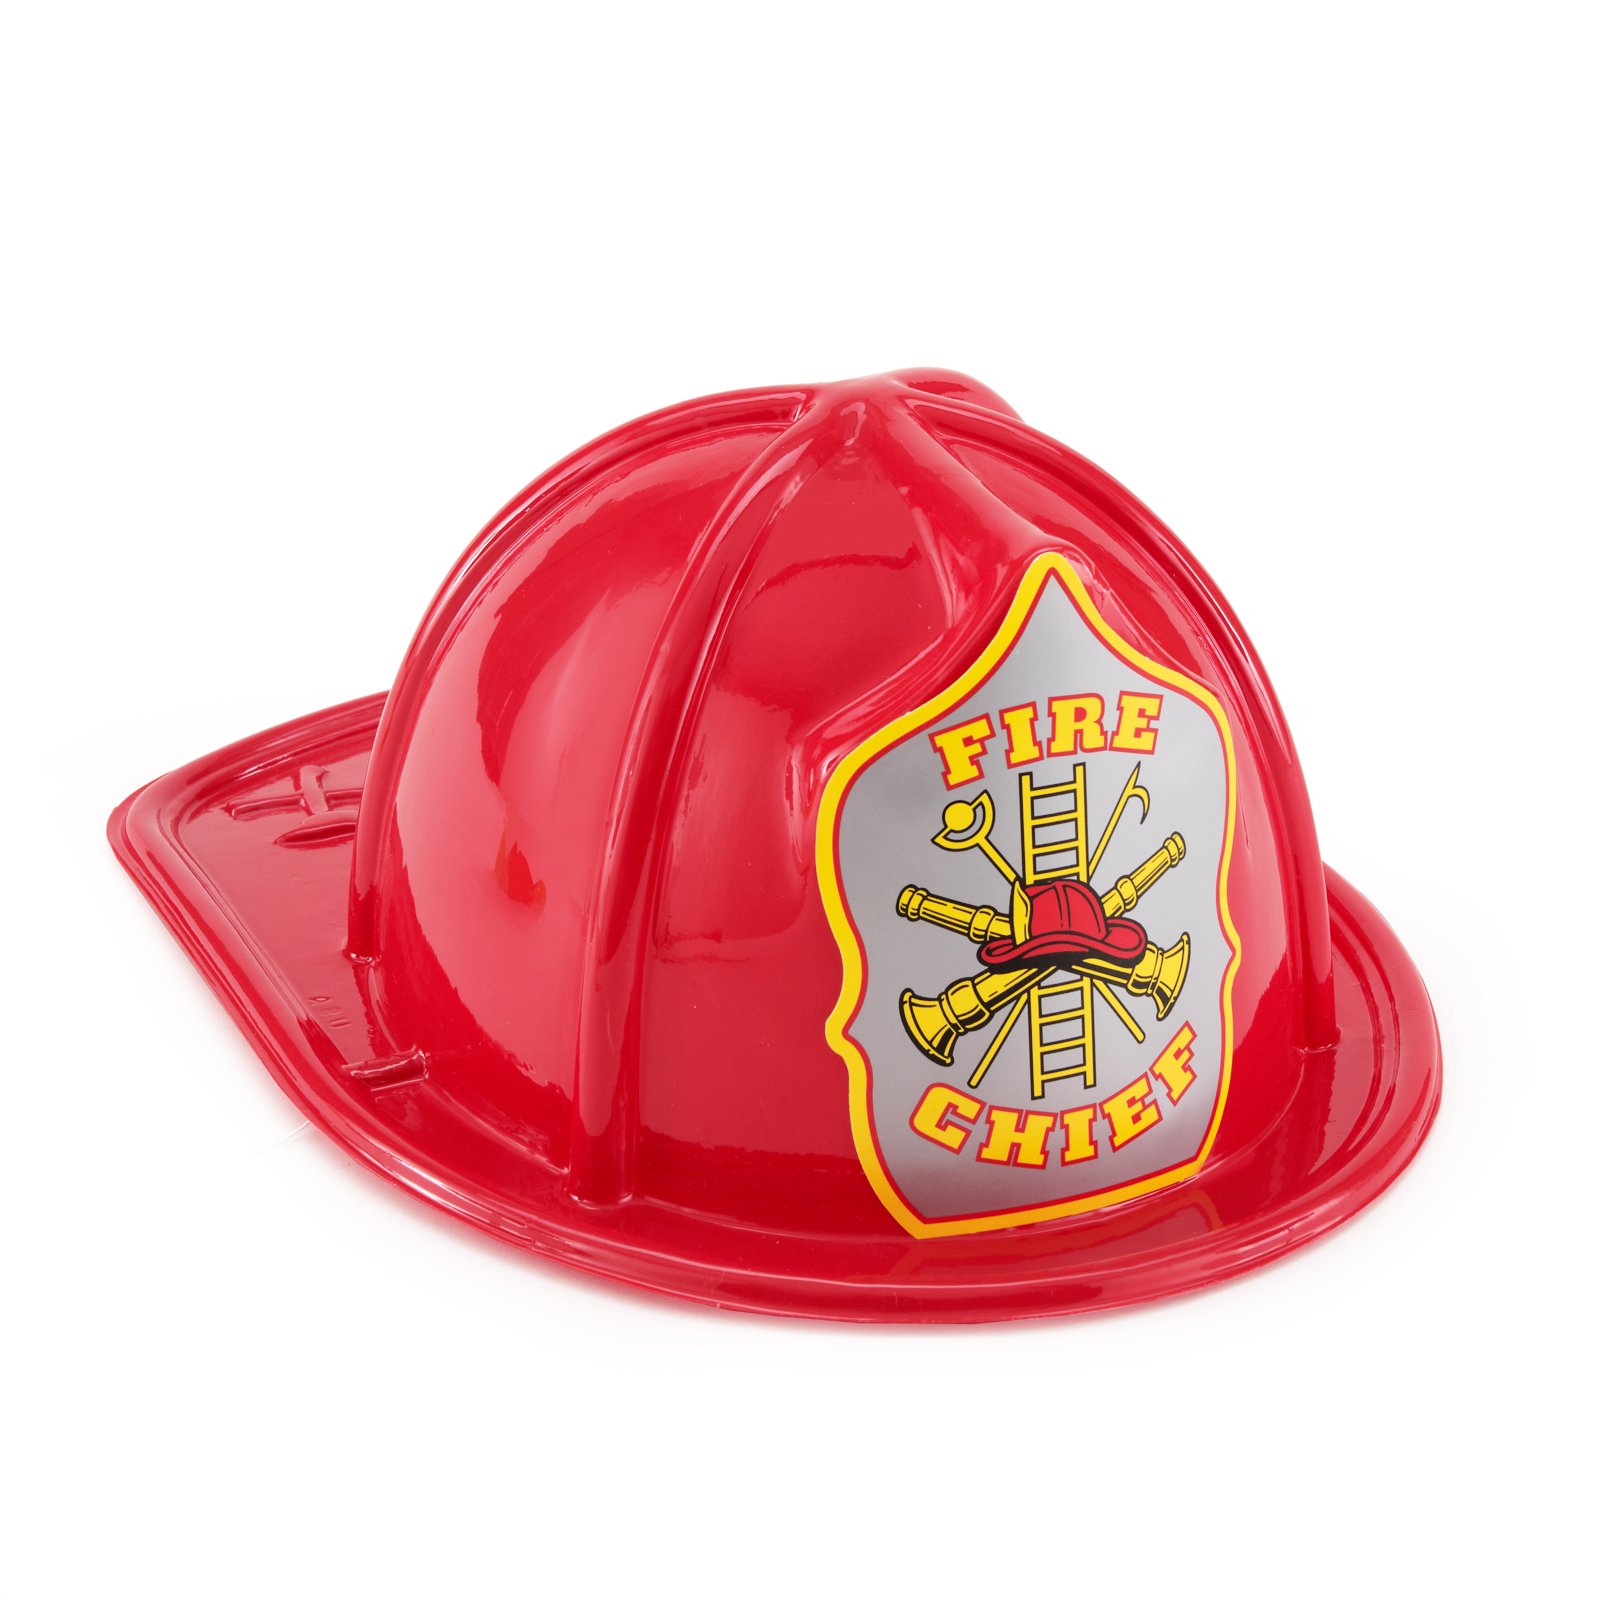 Child Size Red Plastic Fire Chief Hat - - 1622229